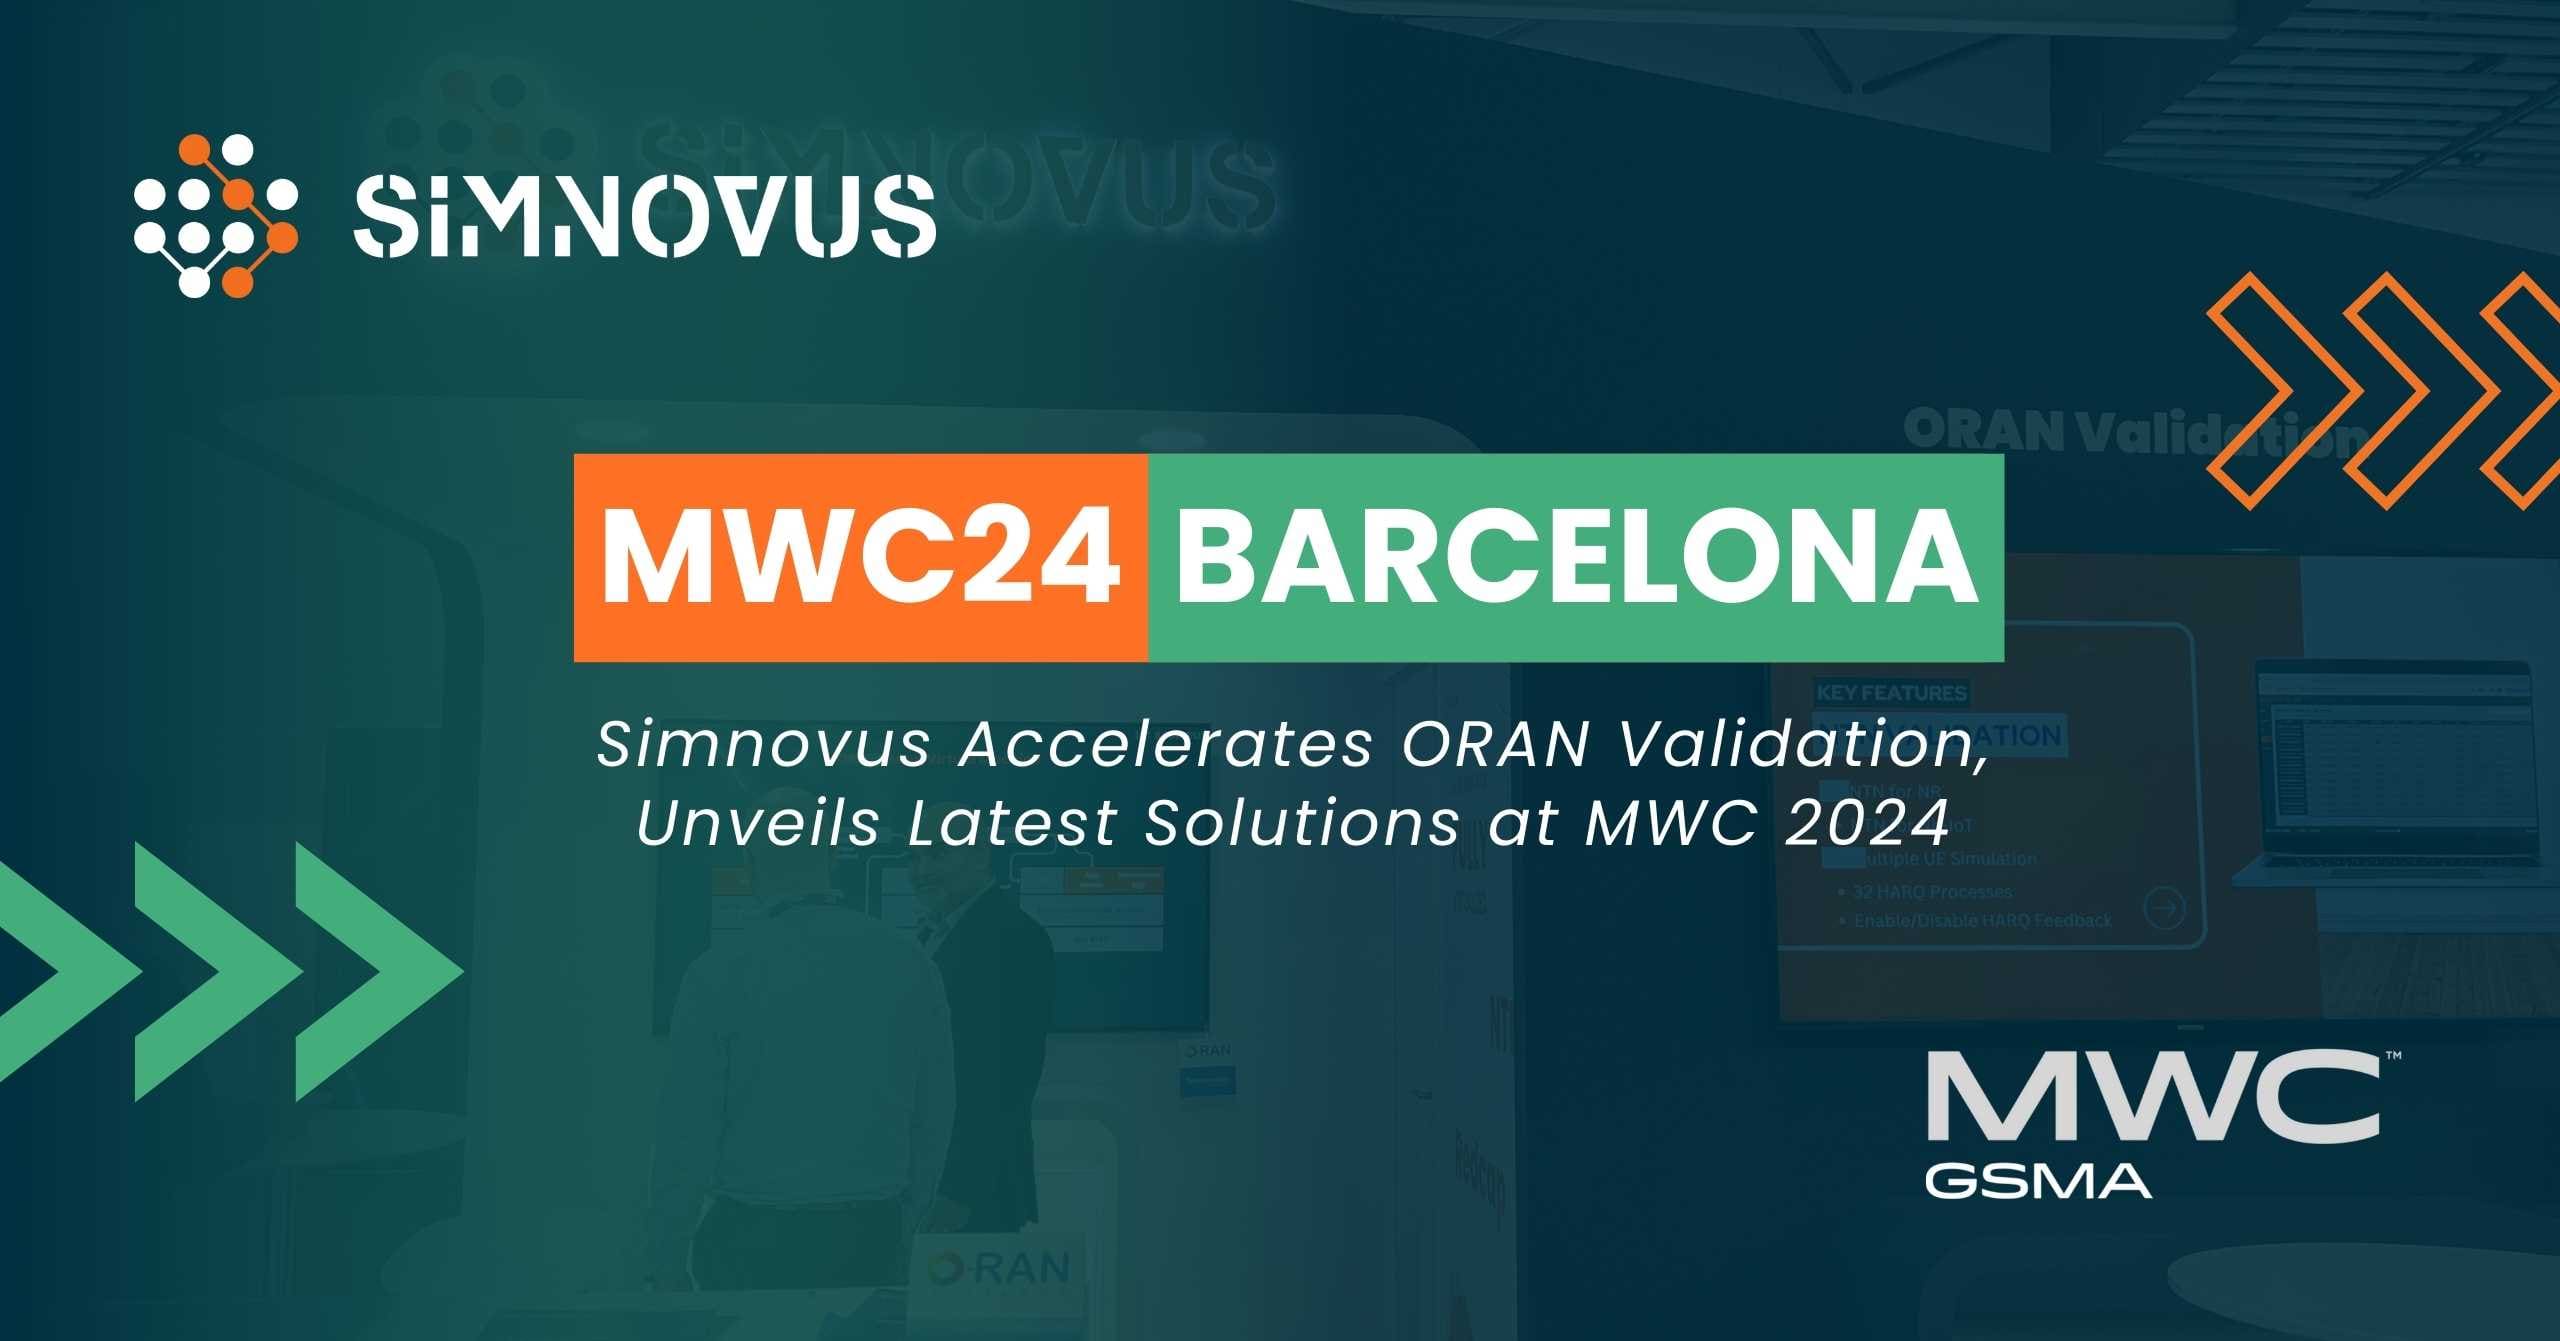 Simnovus Accelerates ORAN Validation, Unveils Latest Solutions at MWC Barcelona 2024